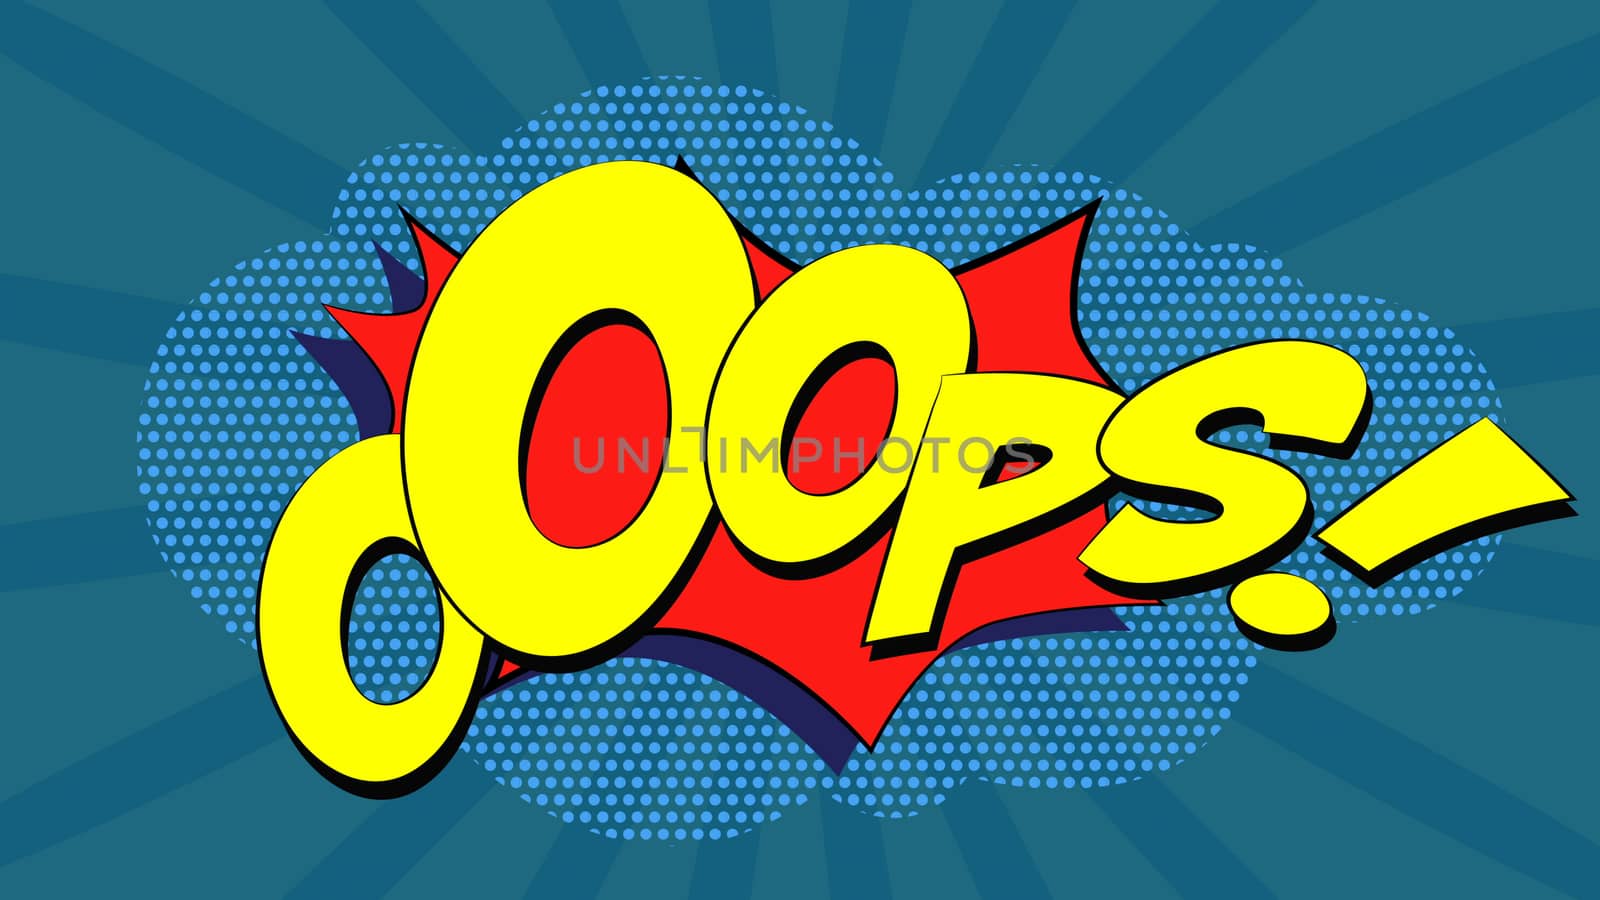 Ooops! Comic Book Bubble Text on a dots cloud background in Pop-Art Retro Style